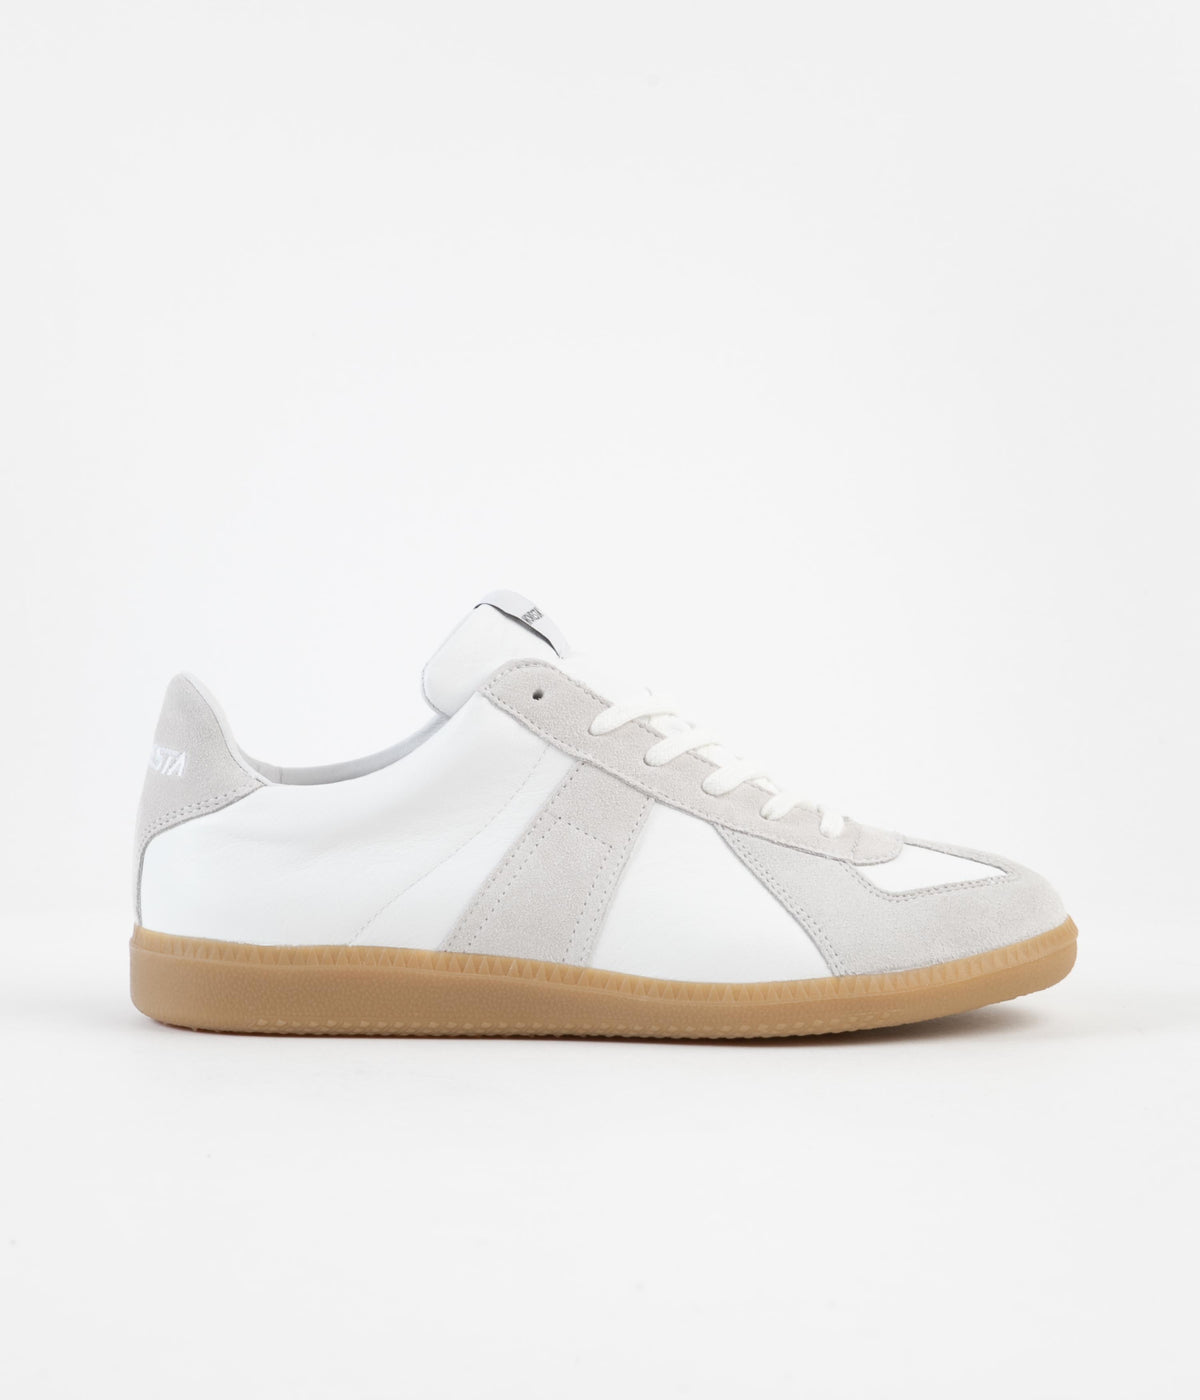 Novesta All Leather German Army Trainer Shoes - White / 003